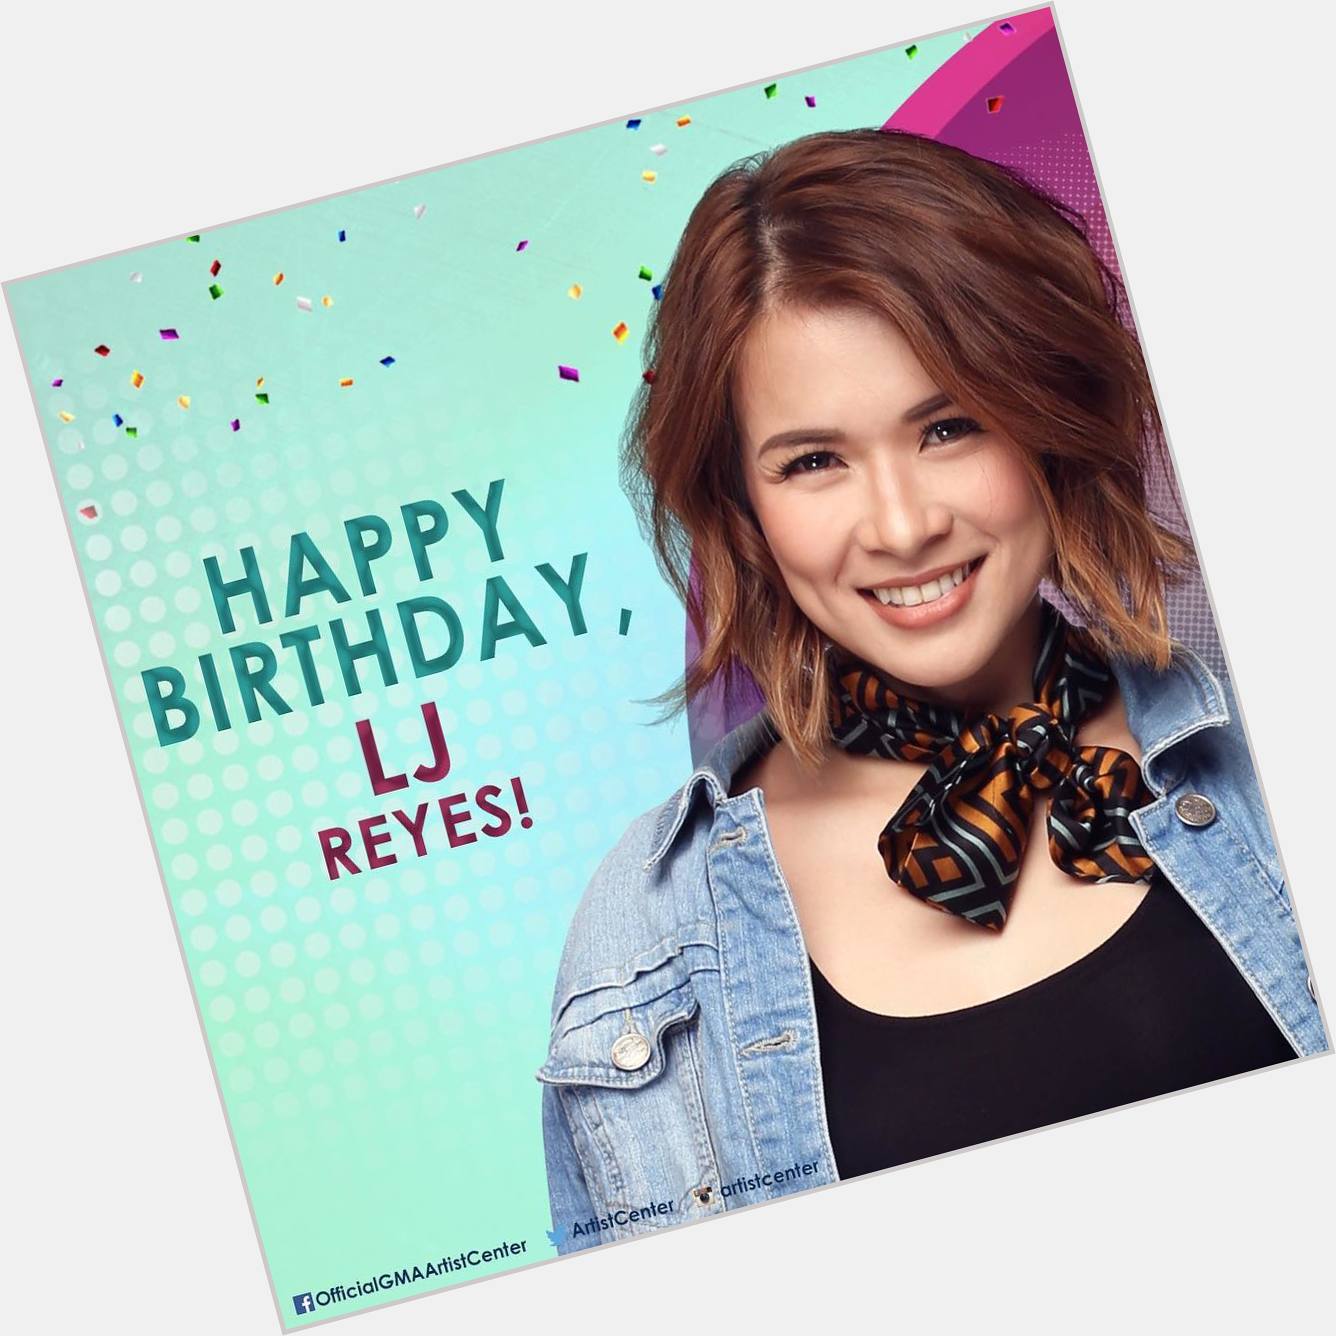  Happy Birthday, LJ Reyes! We wish you nothing but lots of love and joy!      